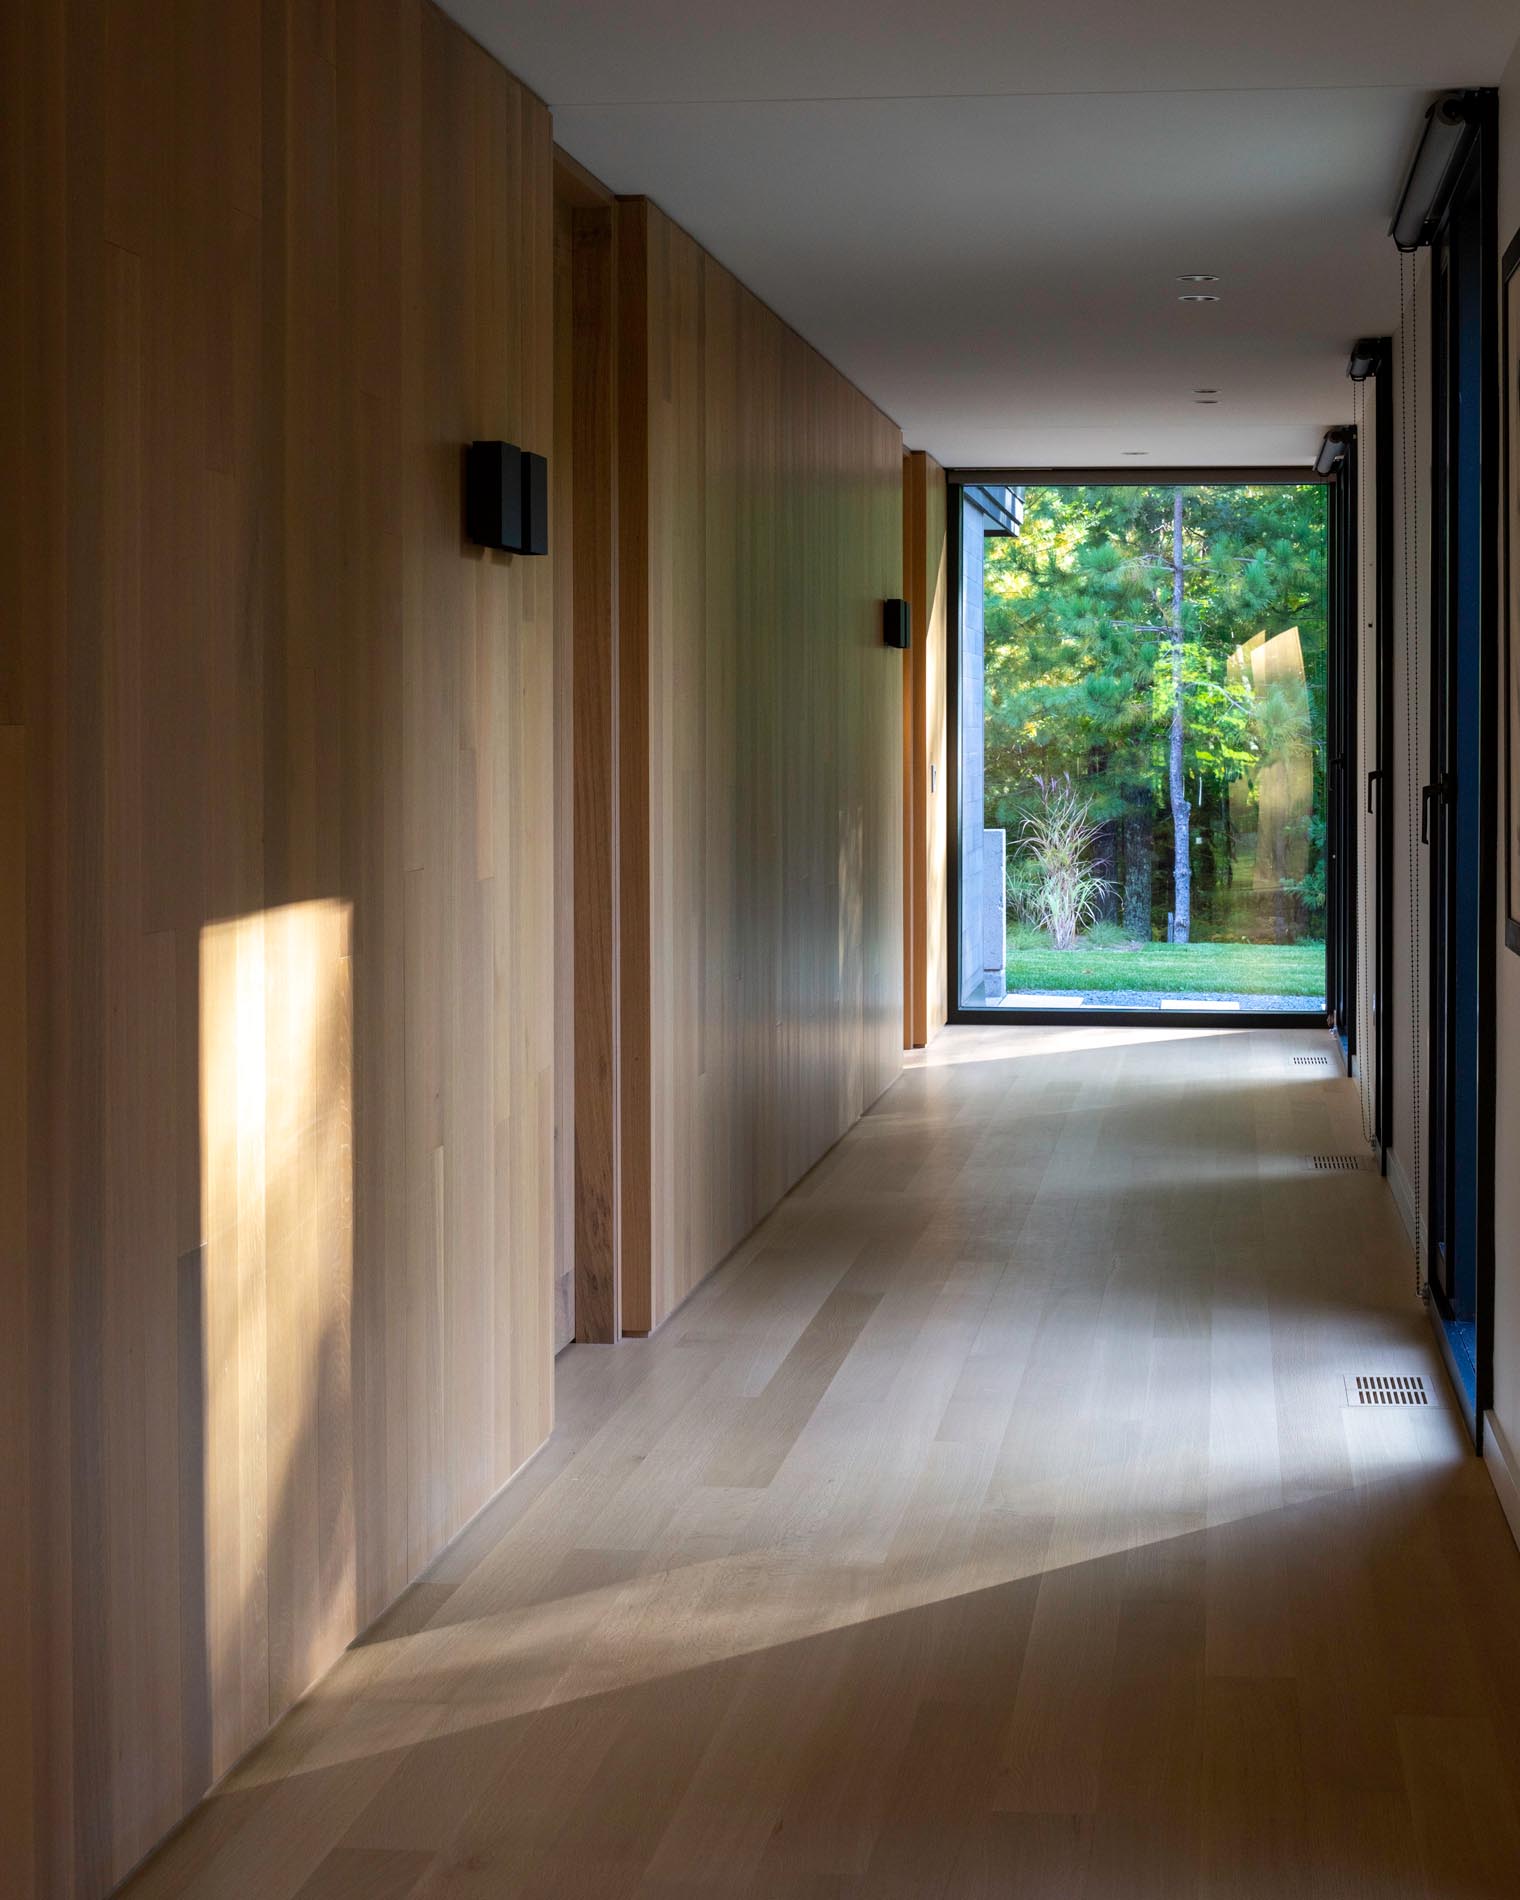 Views of the trees can bee seen through the black-framed windows that line the hallway to the bedrooms.